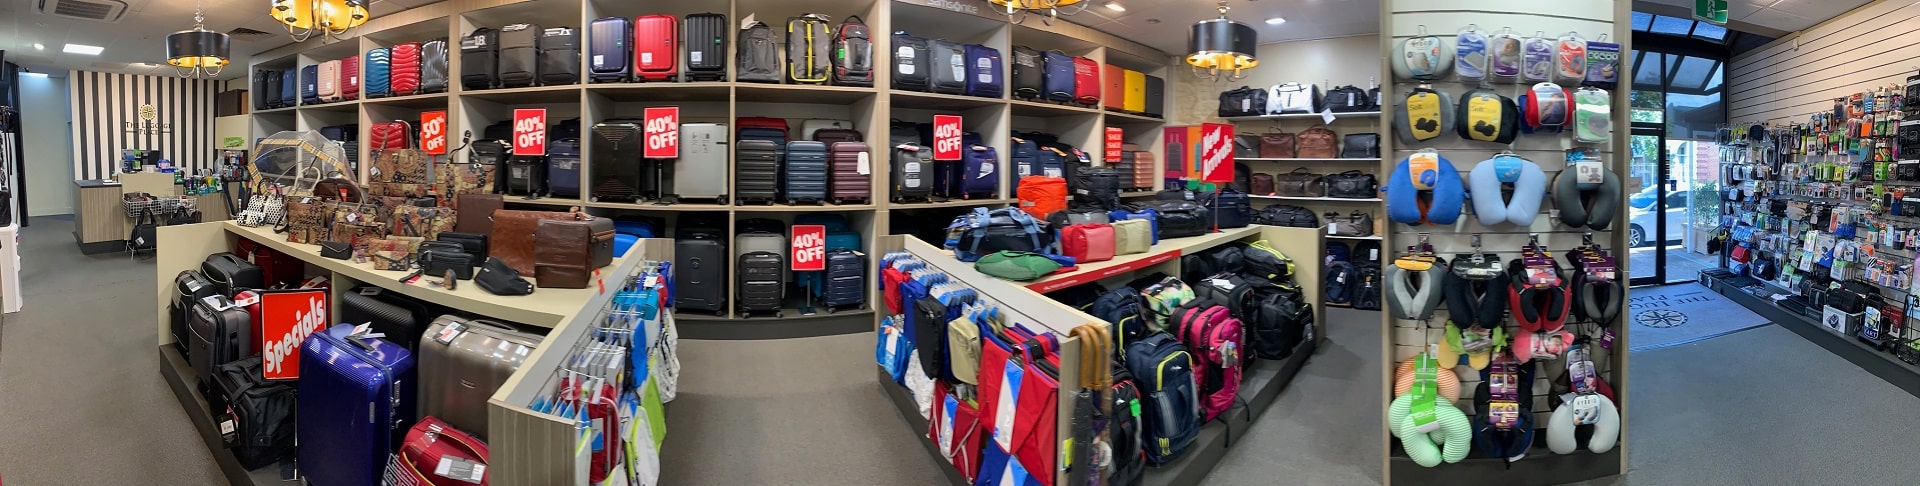 The Luggage Place shop